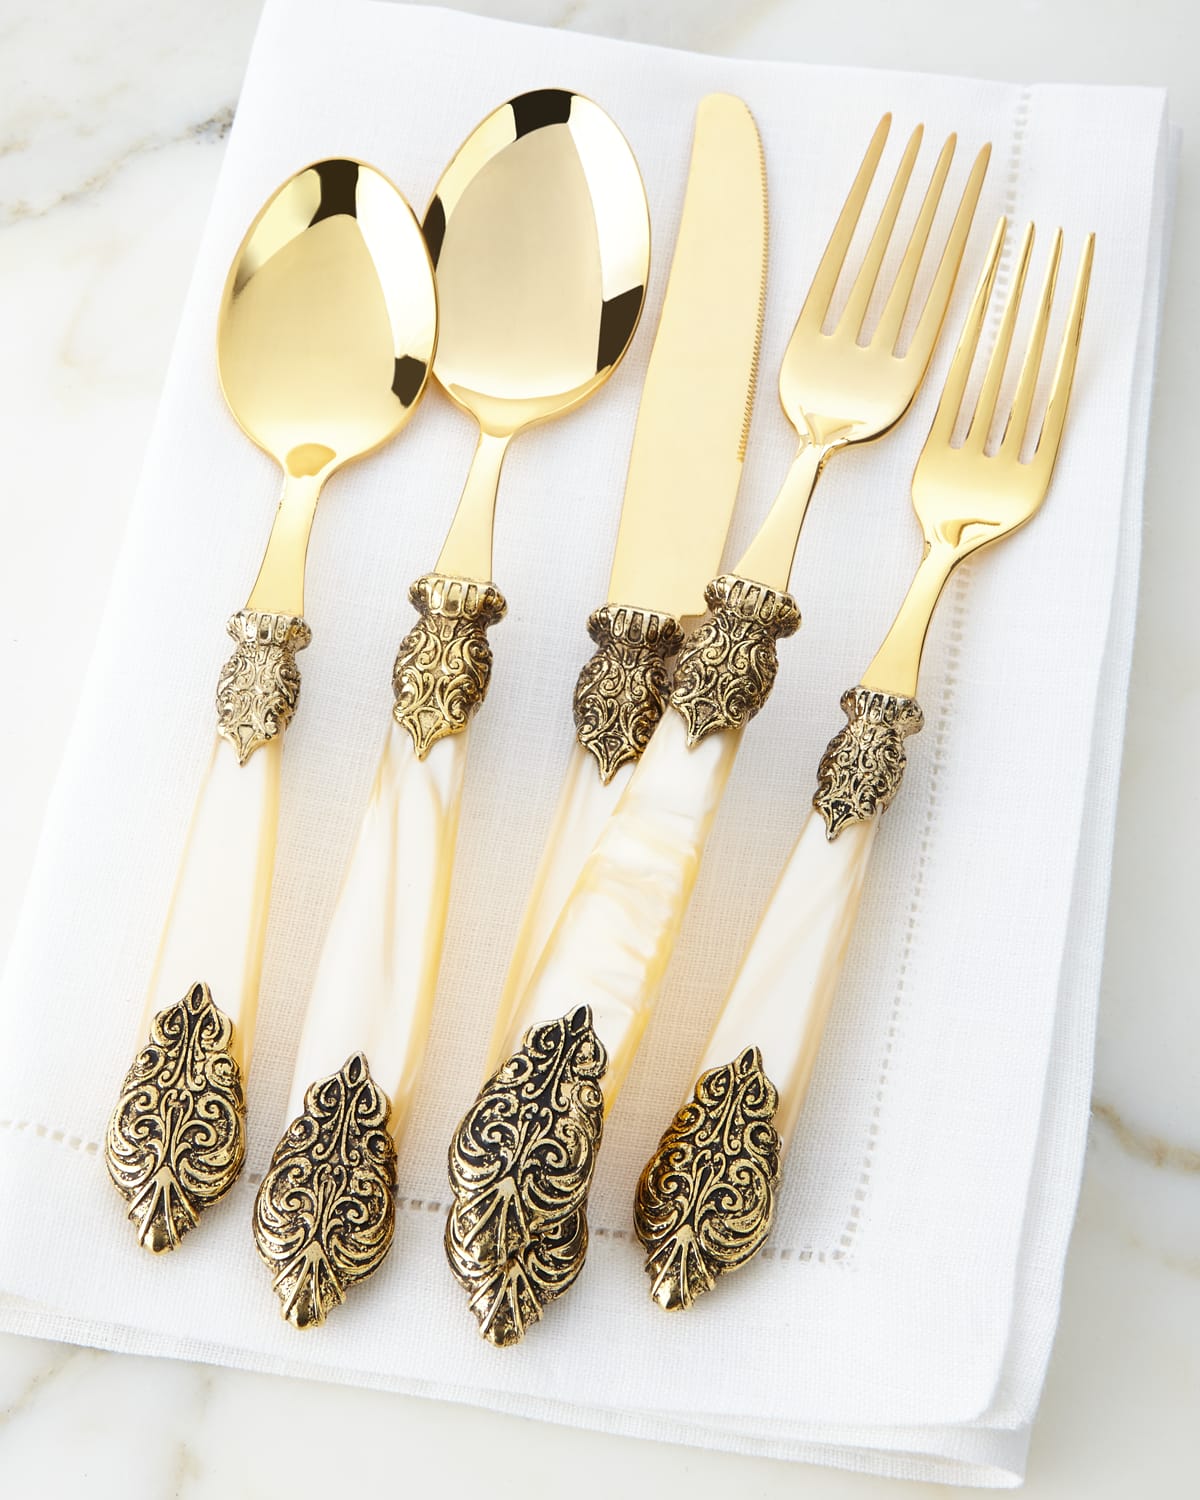 Neiman Marcus 20-piece Antiqued-gold Versaille Flatware Service In Champagne Pearl